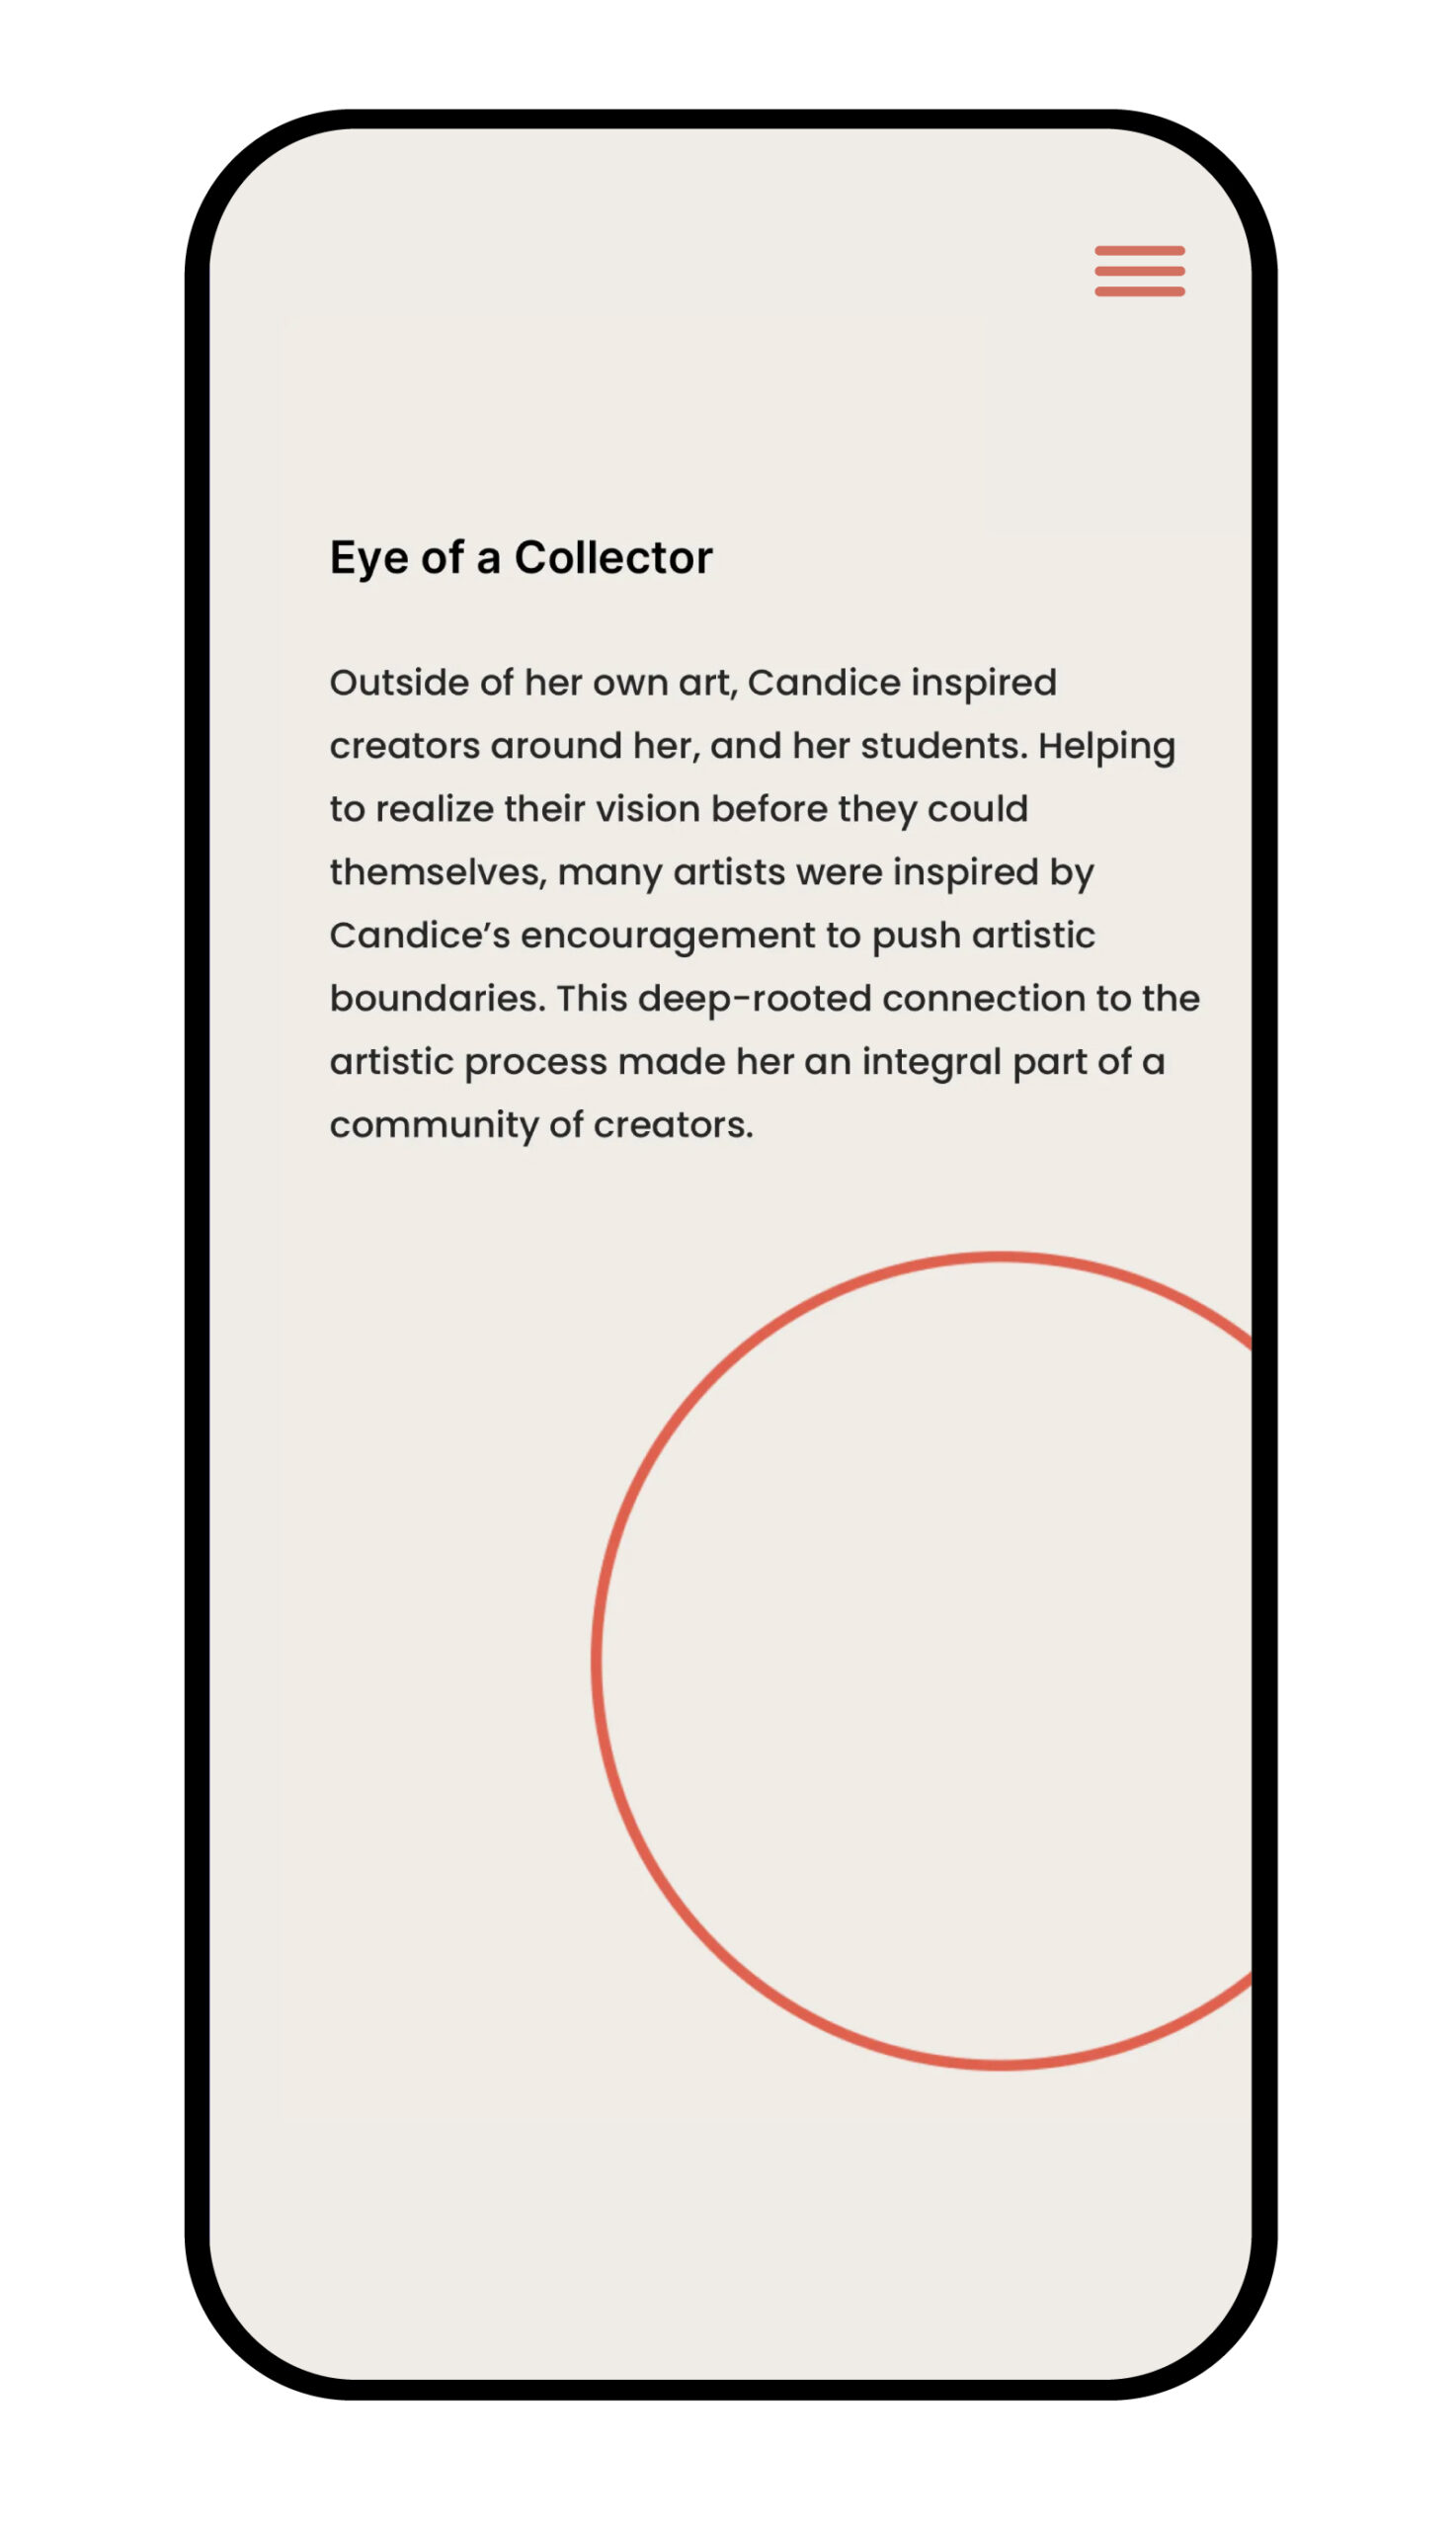 A mobile web design with a graphic of a red circle and text.